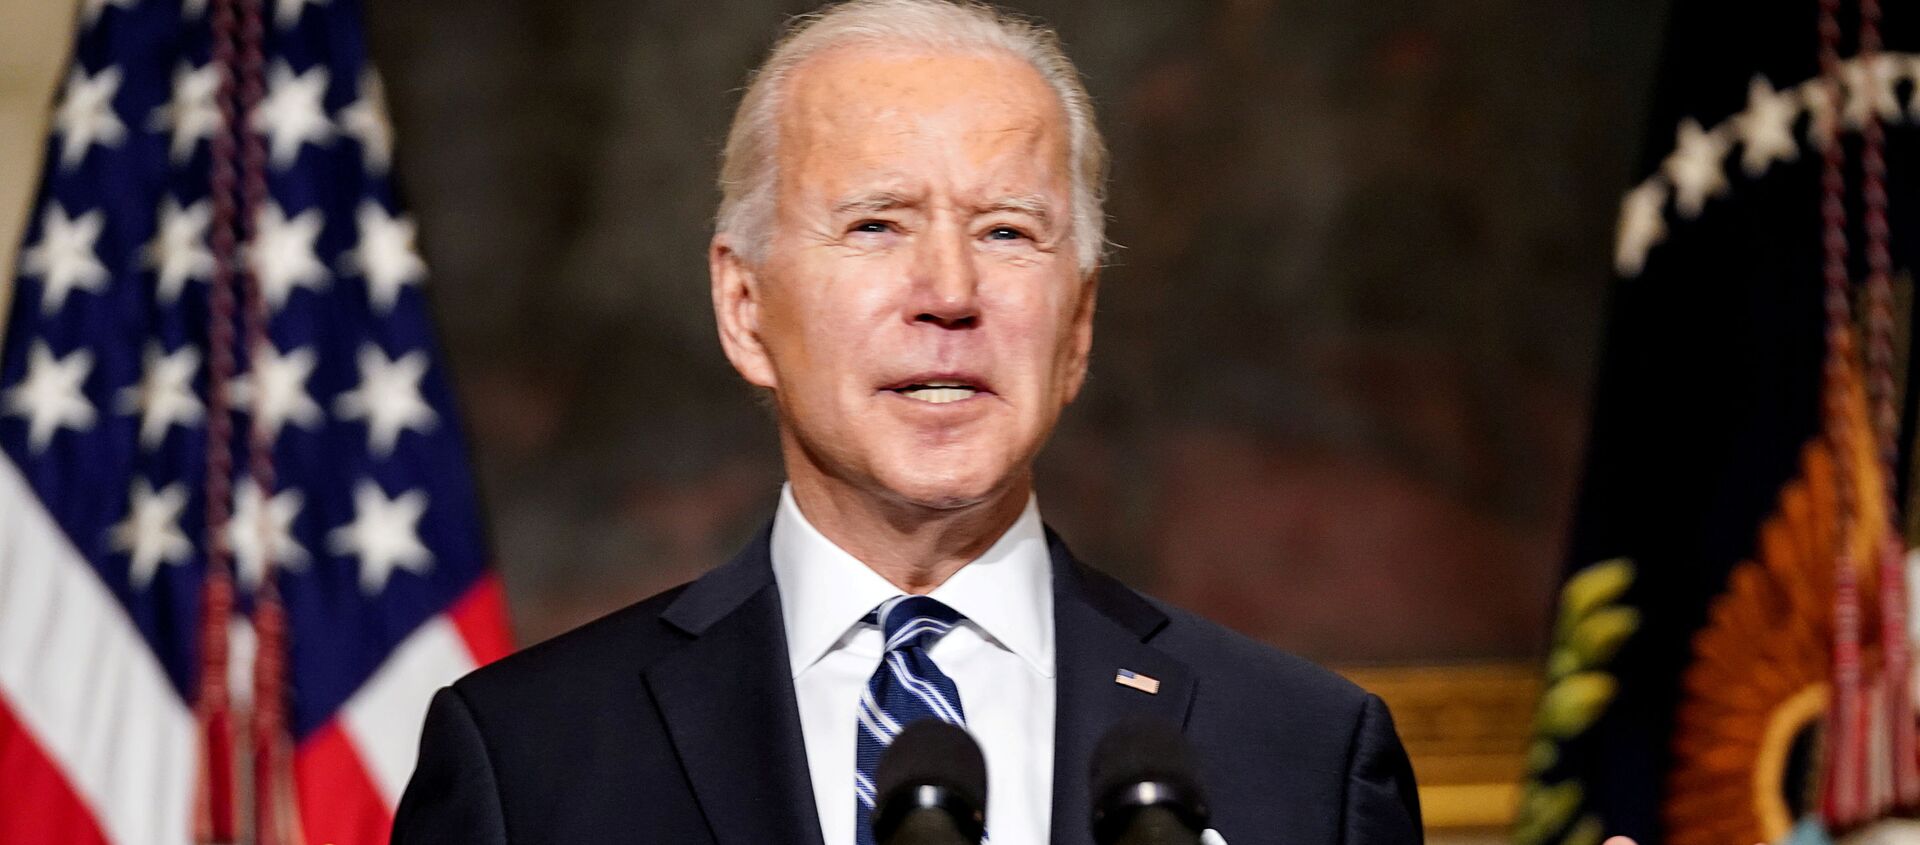 FILE PHOTO: U.S. President Joe Biden delivers remarks on tackling climate change prior to signing executive actions in the State Dining Room at the White House in Washington, U.S., January 27, 2021.  - Sputnik International, 1920, 10.04.2021